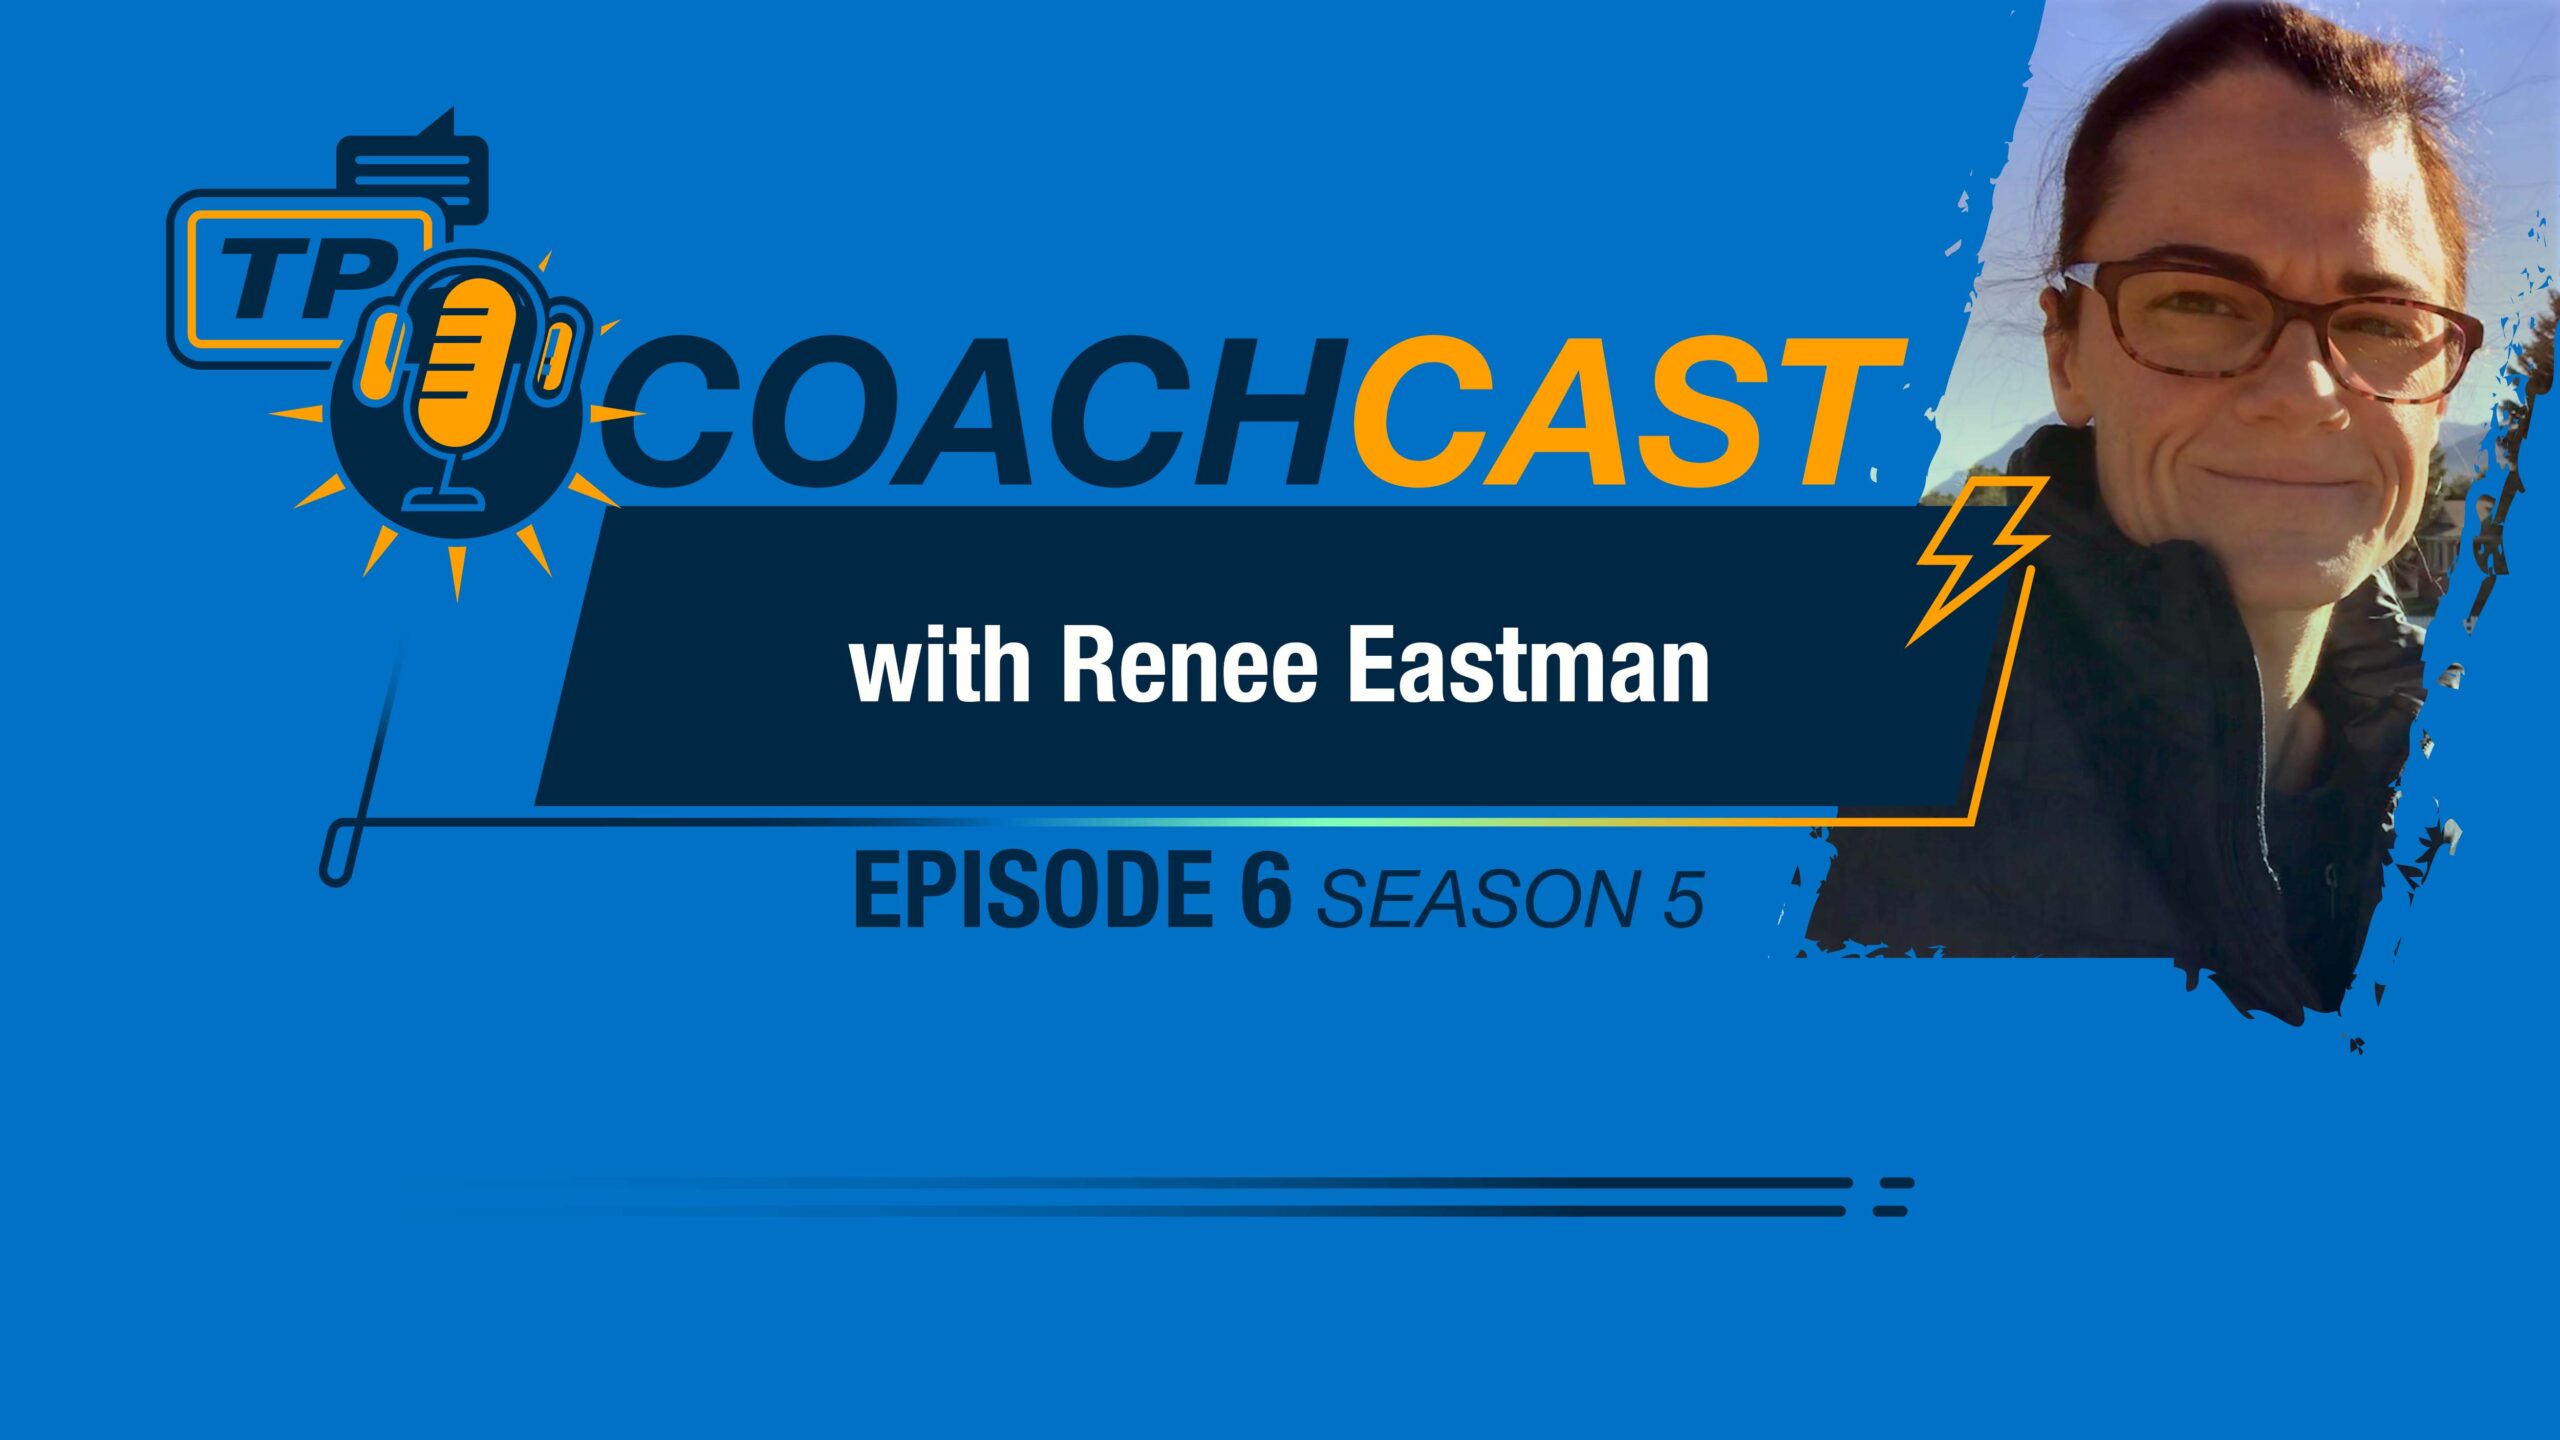 Coachcast Title Image With Small Portrait Of Renee Eastman